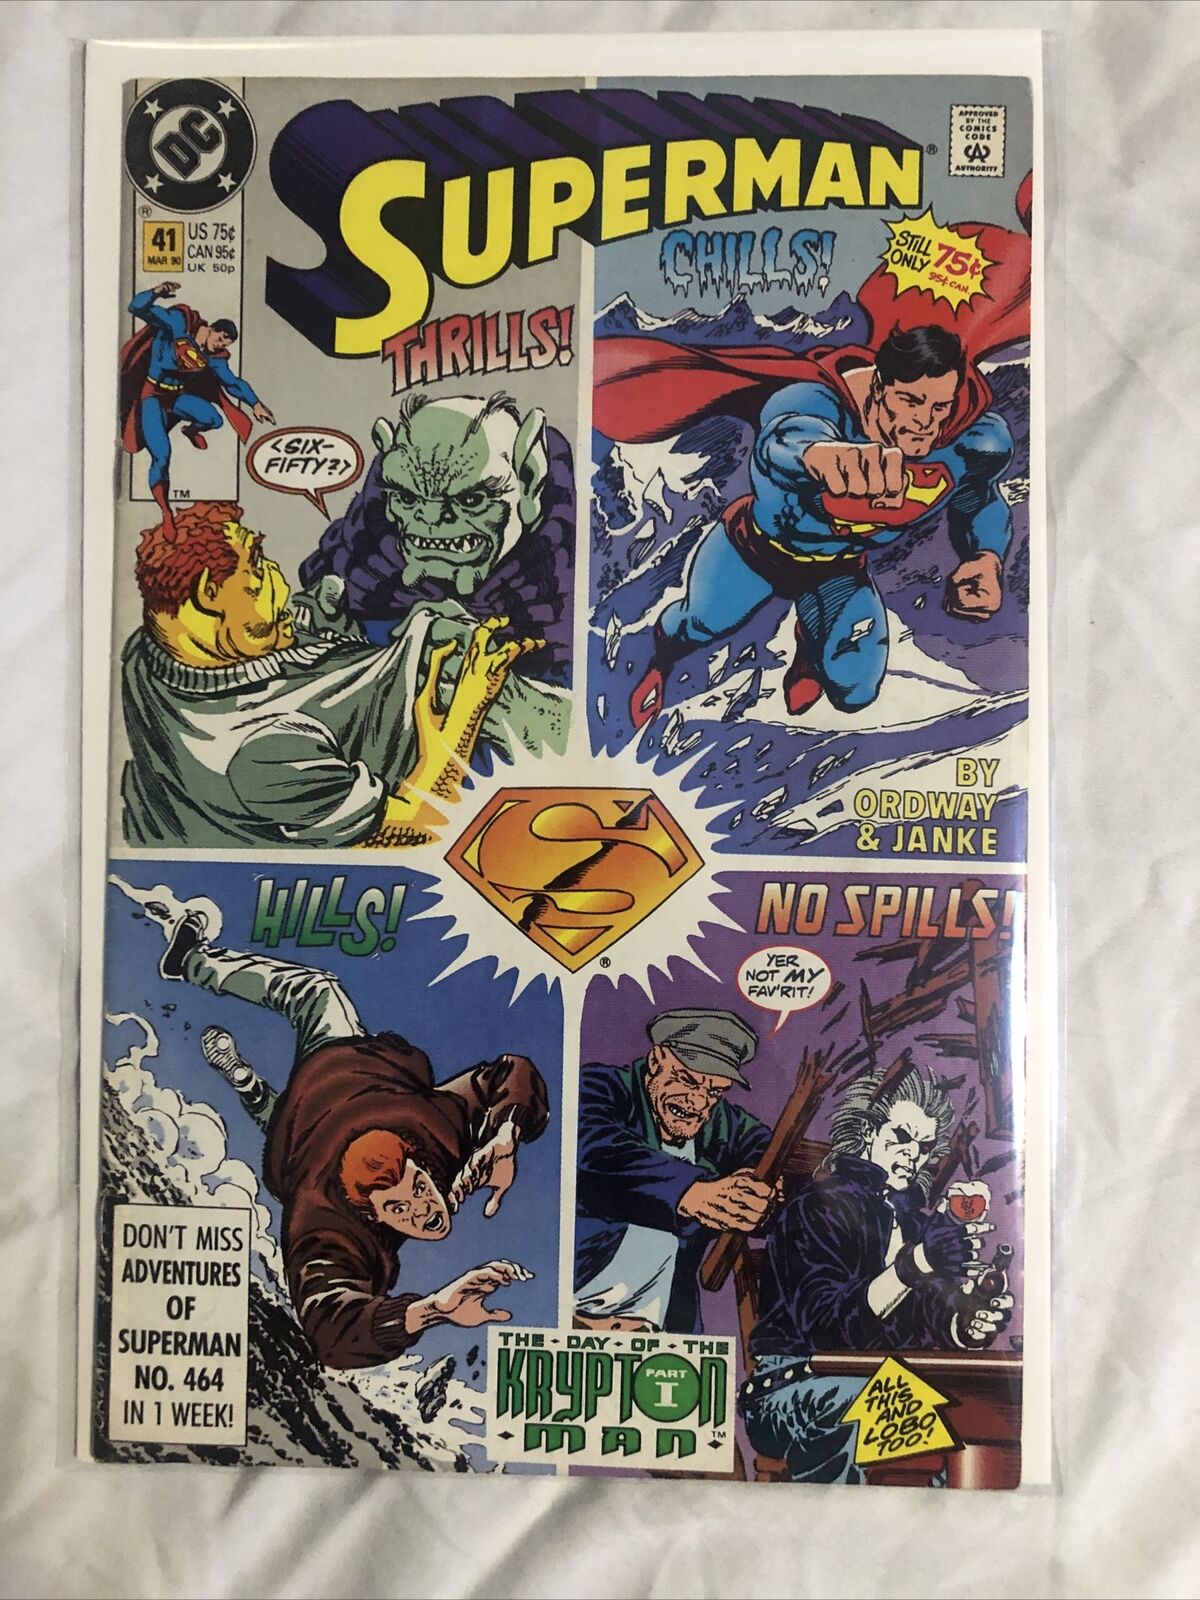 Superman The Day Of The Krypton Man Part 1 #41 Mar 1990 Comic Book DC